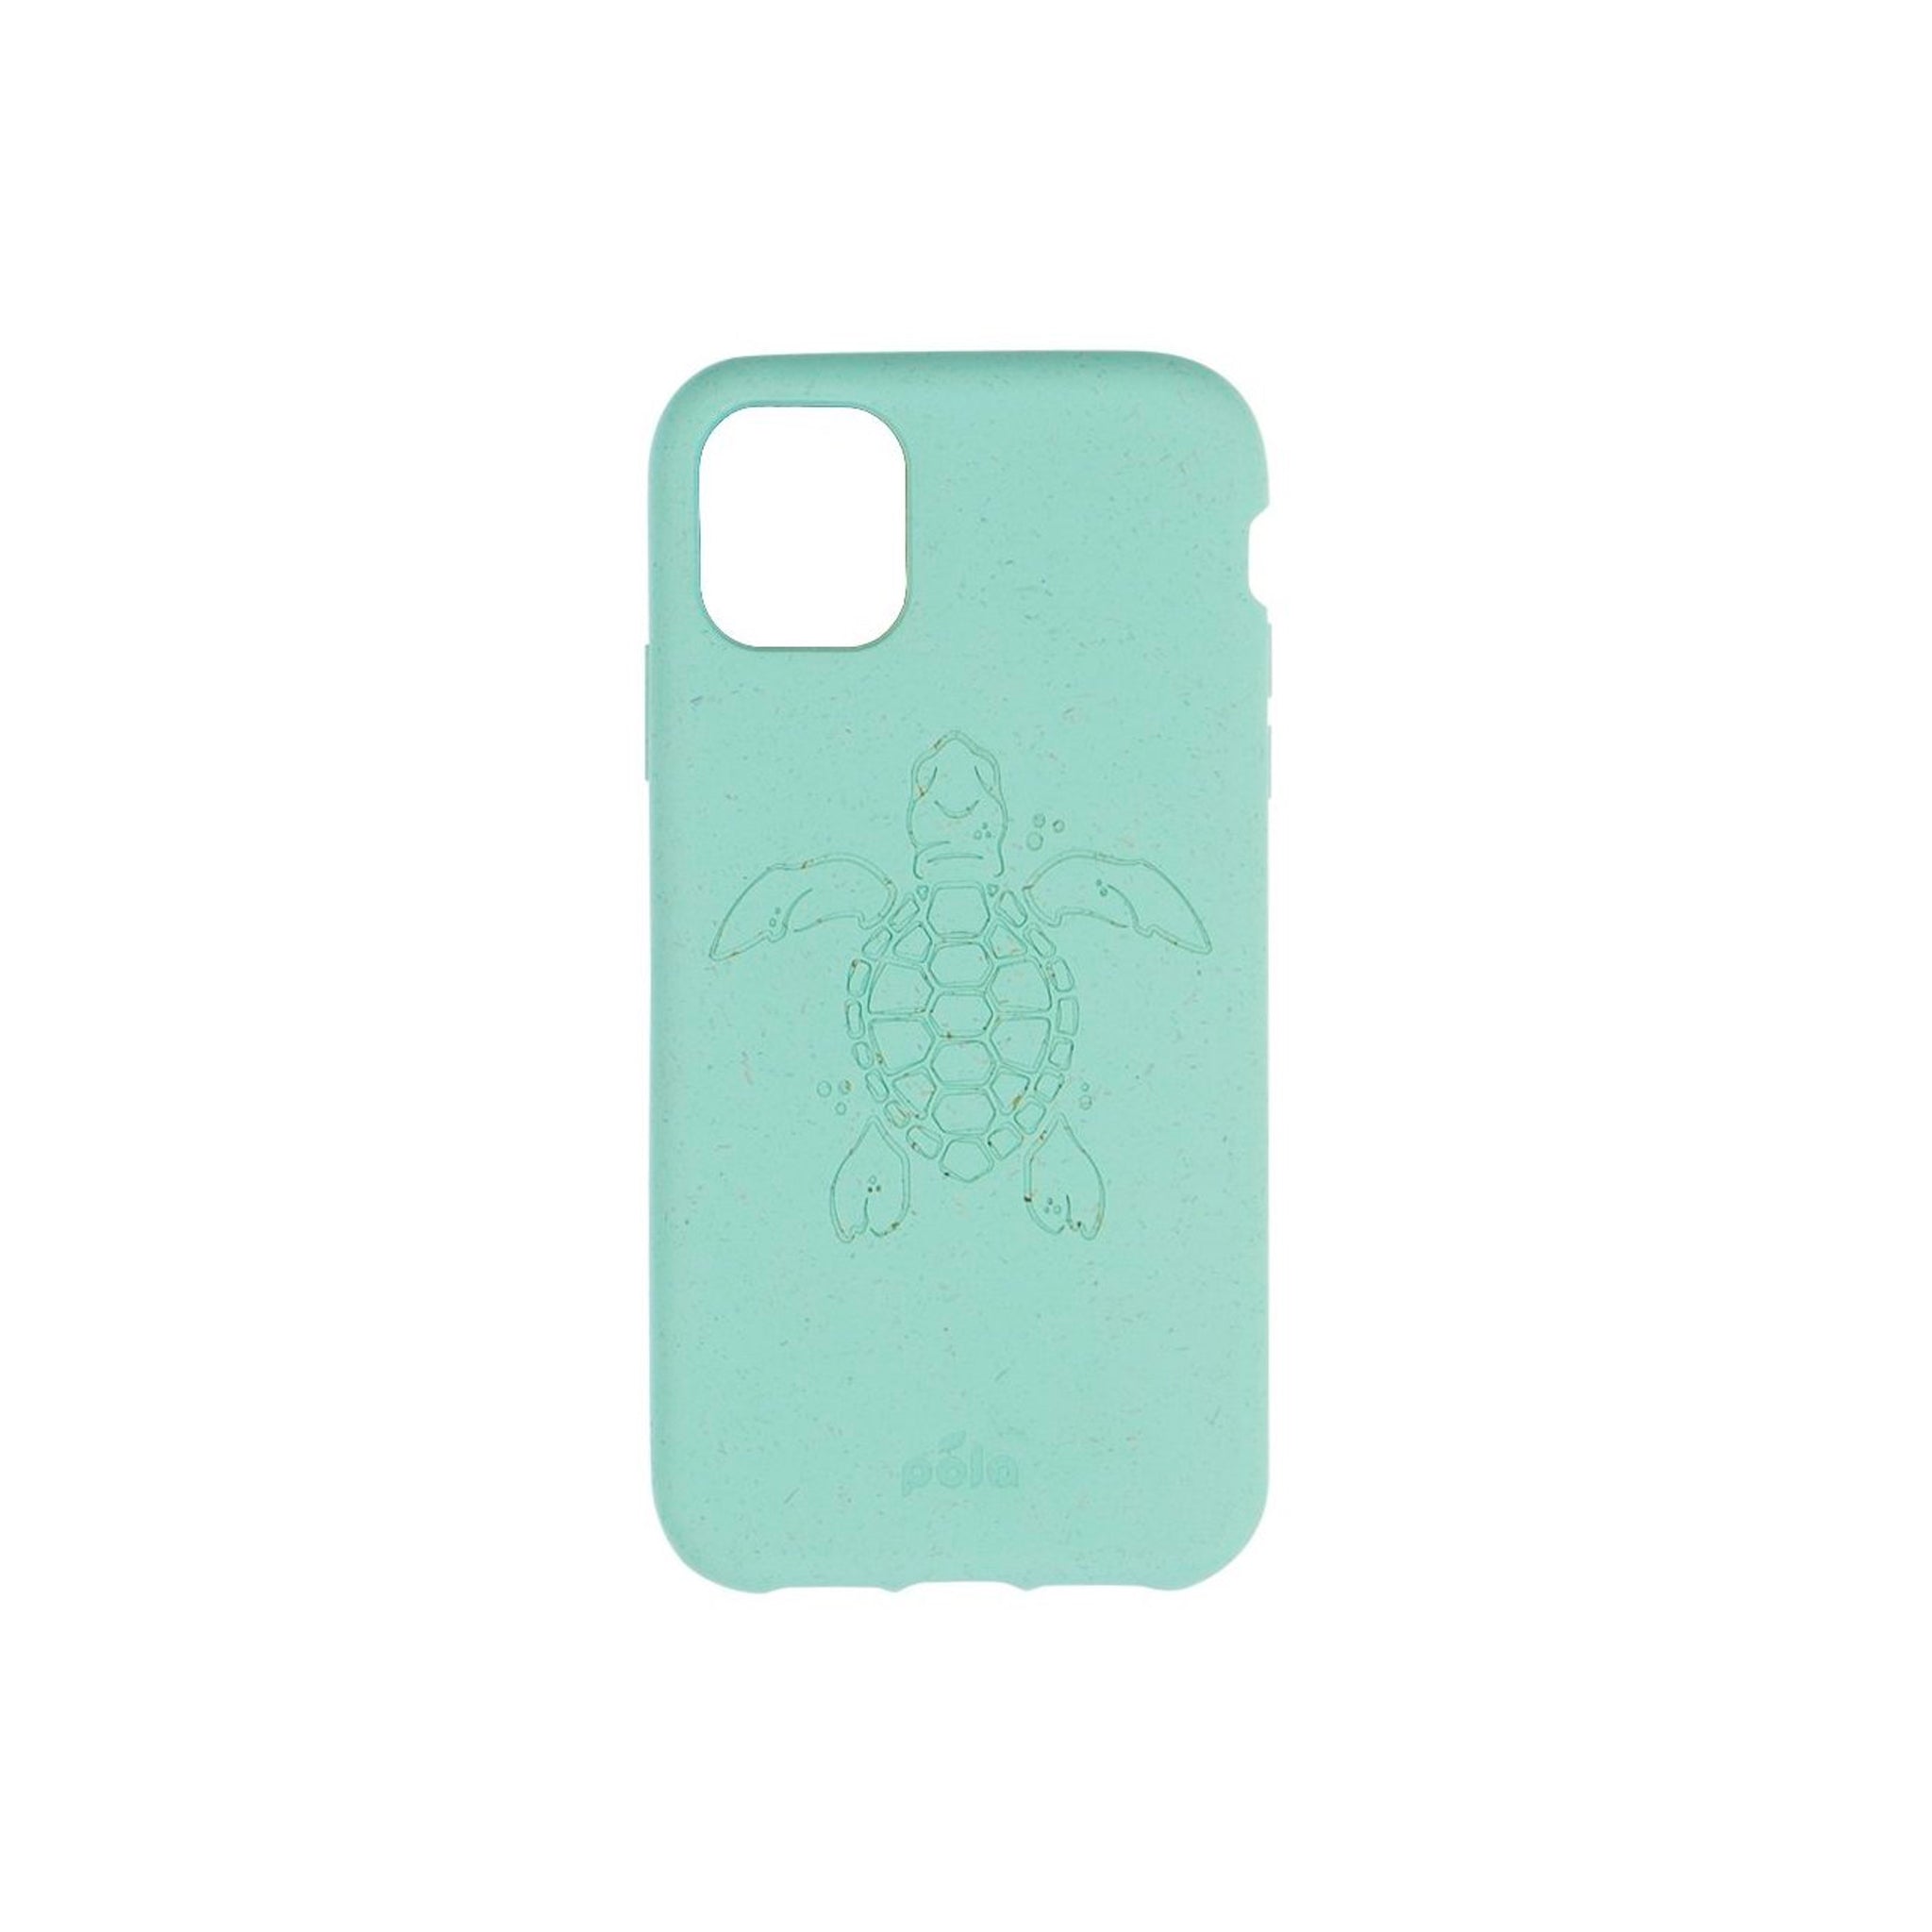 Pela - Eco Friendly Case For Apple Iphone 12 Pro Max - Ocean Turquoise Turtle Edition